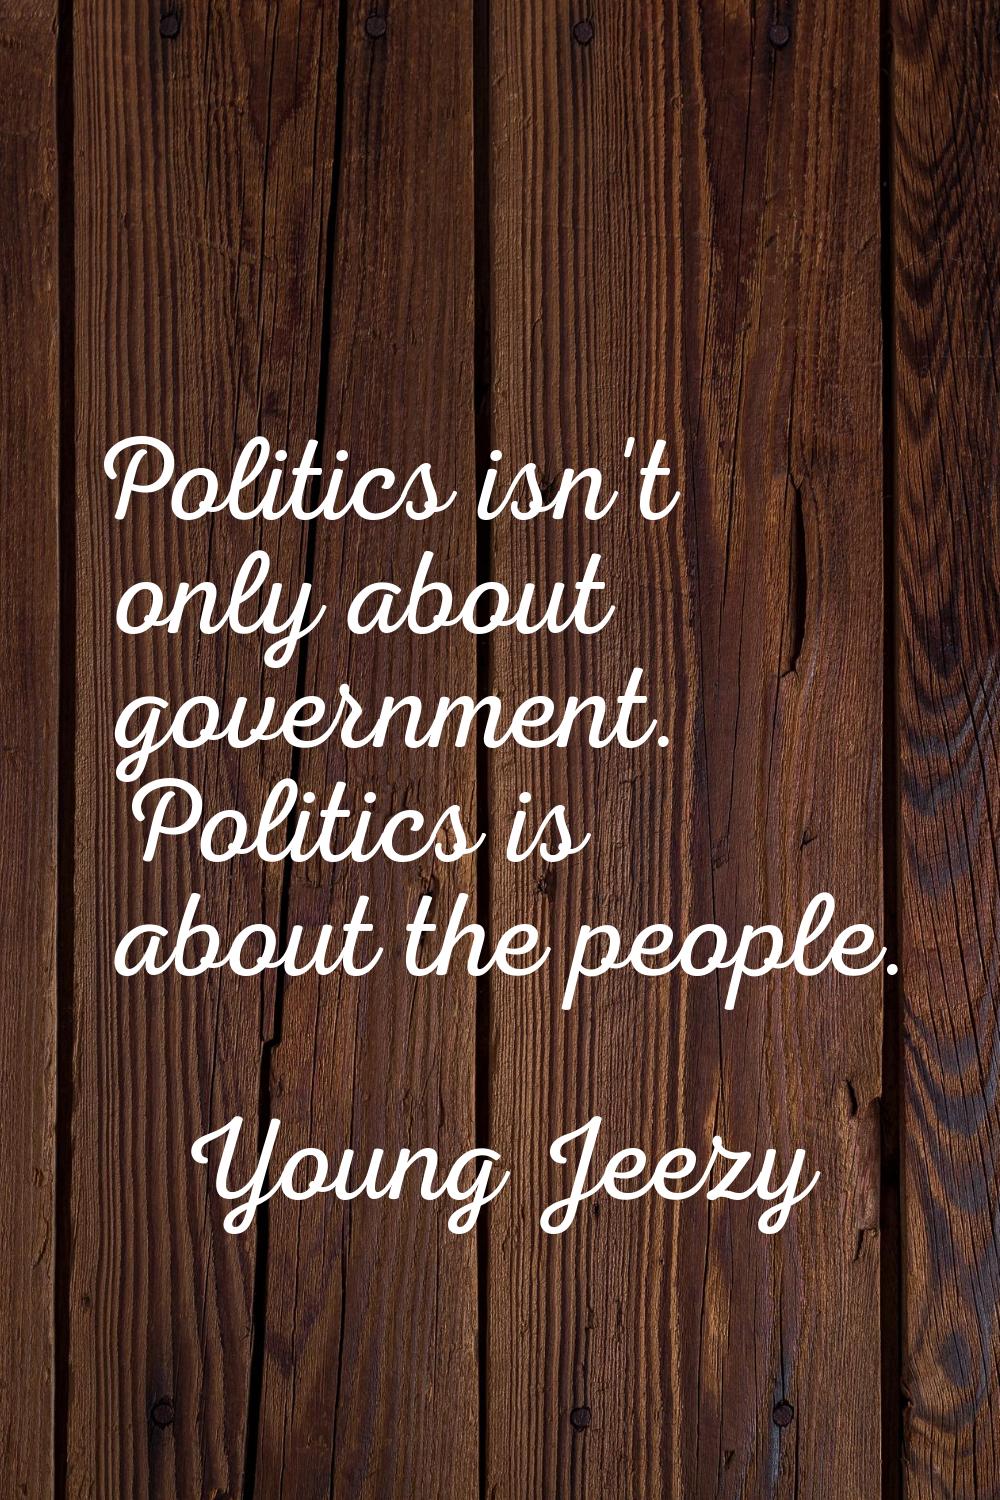 Politics isn't only about government. Politics is about the people.